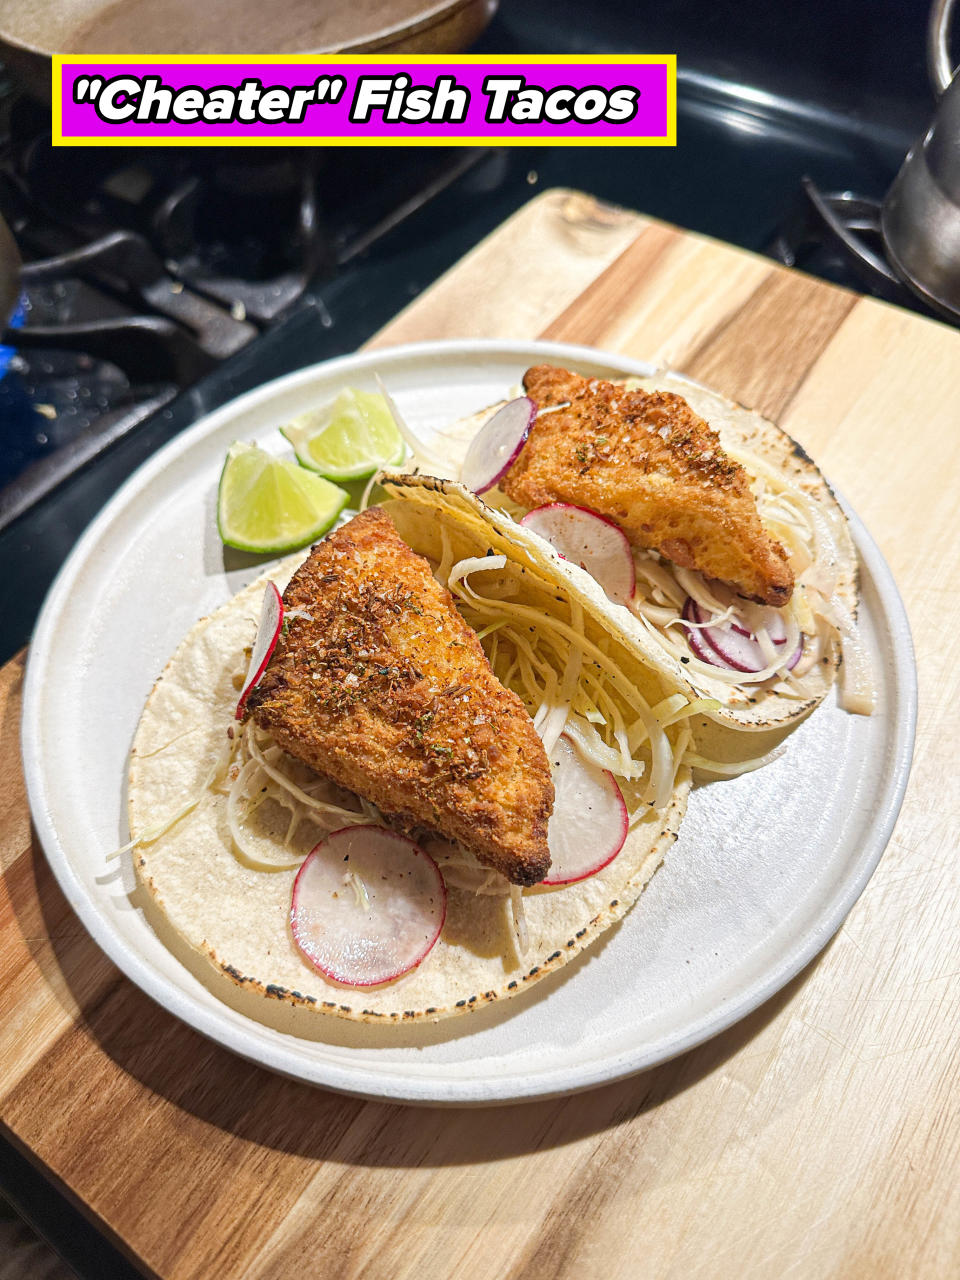 Two fish tacos served on corn tortillas, topped with shredded cheese, radish slices, and a side of lime wedges on a white plate